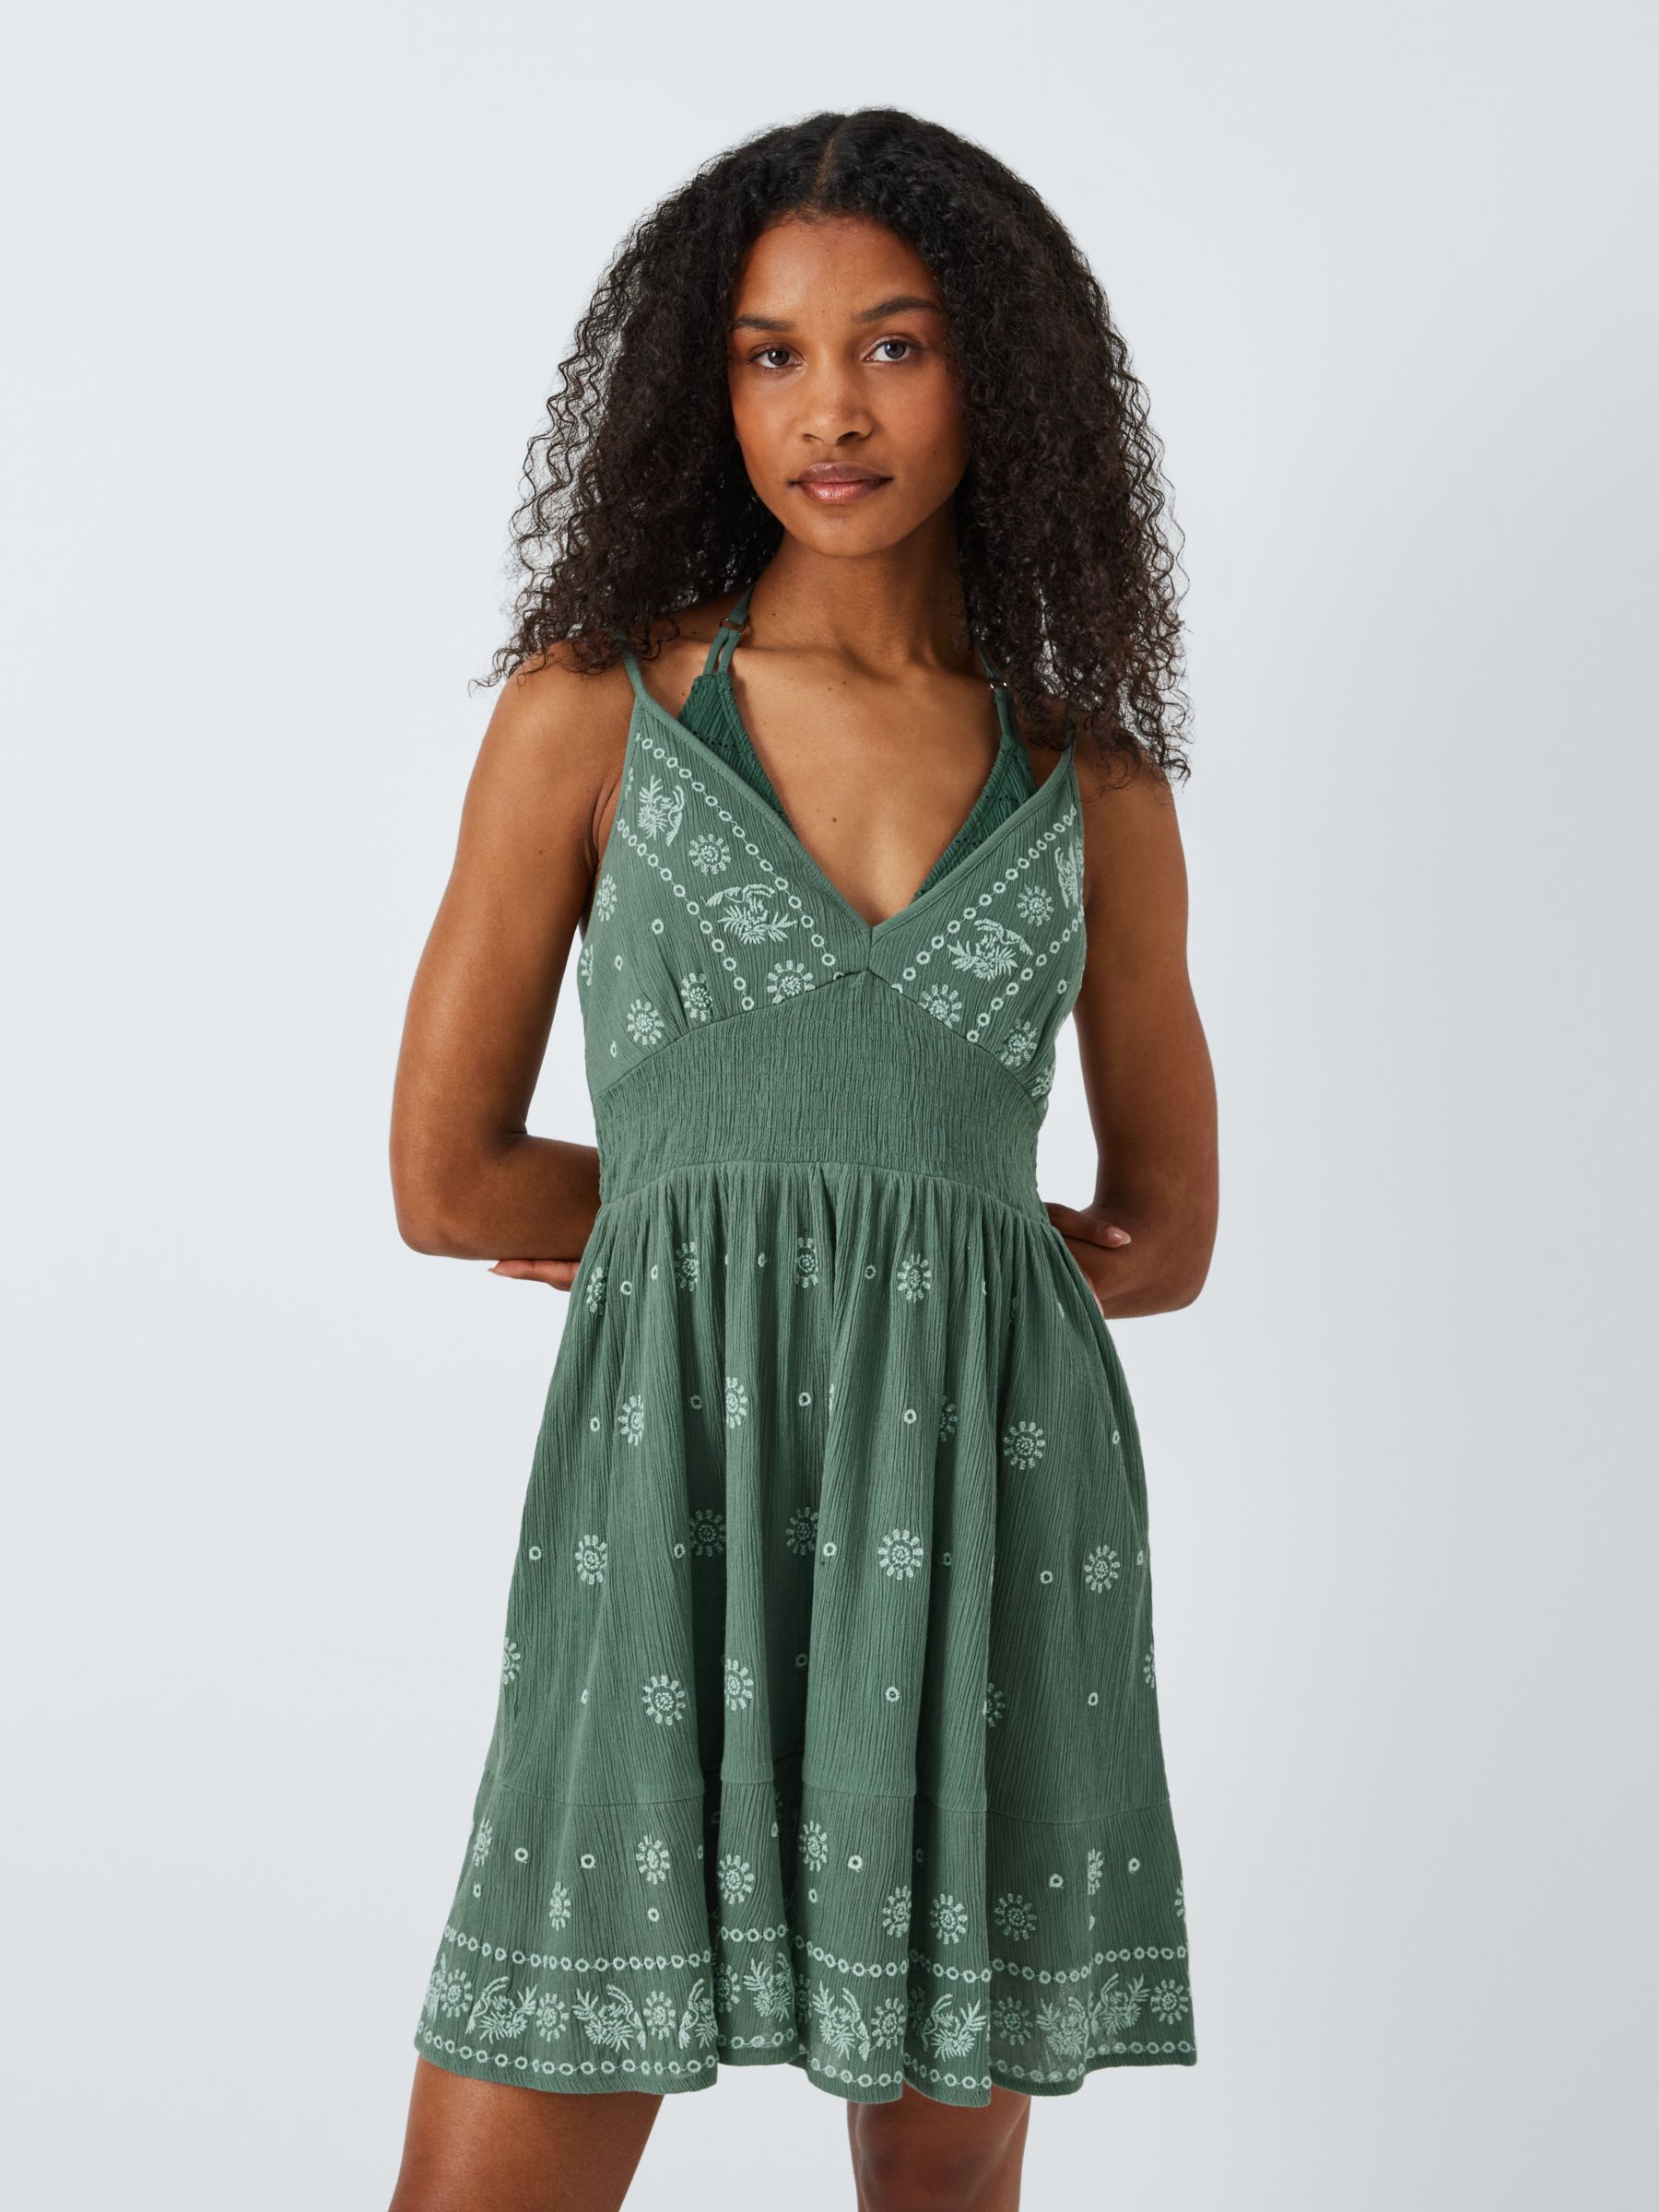 AND/OR Tropics Embroidered Mini Beach Dress, Green, S